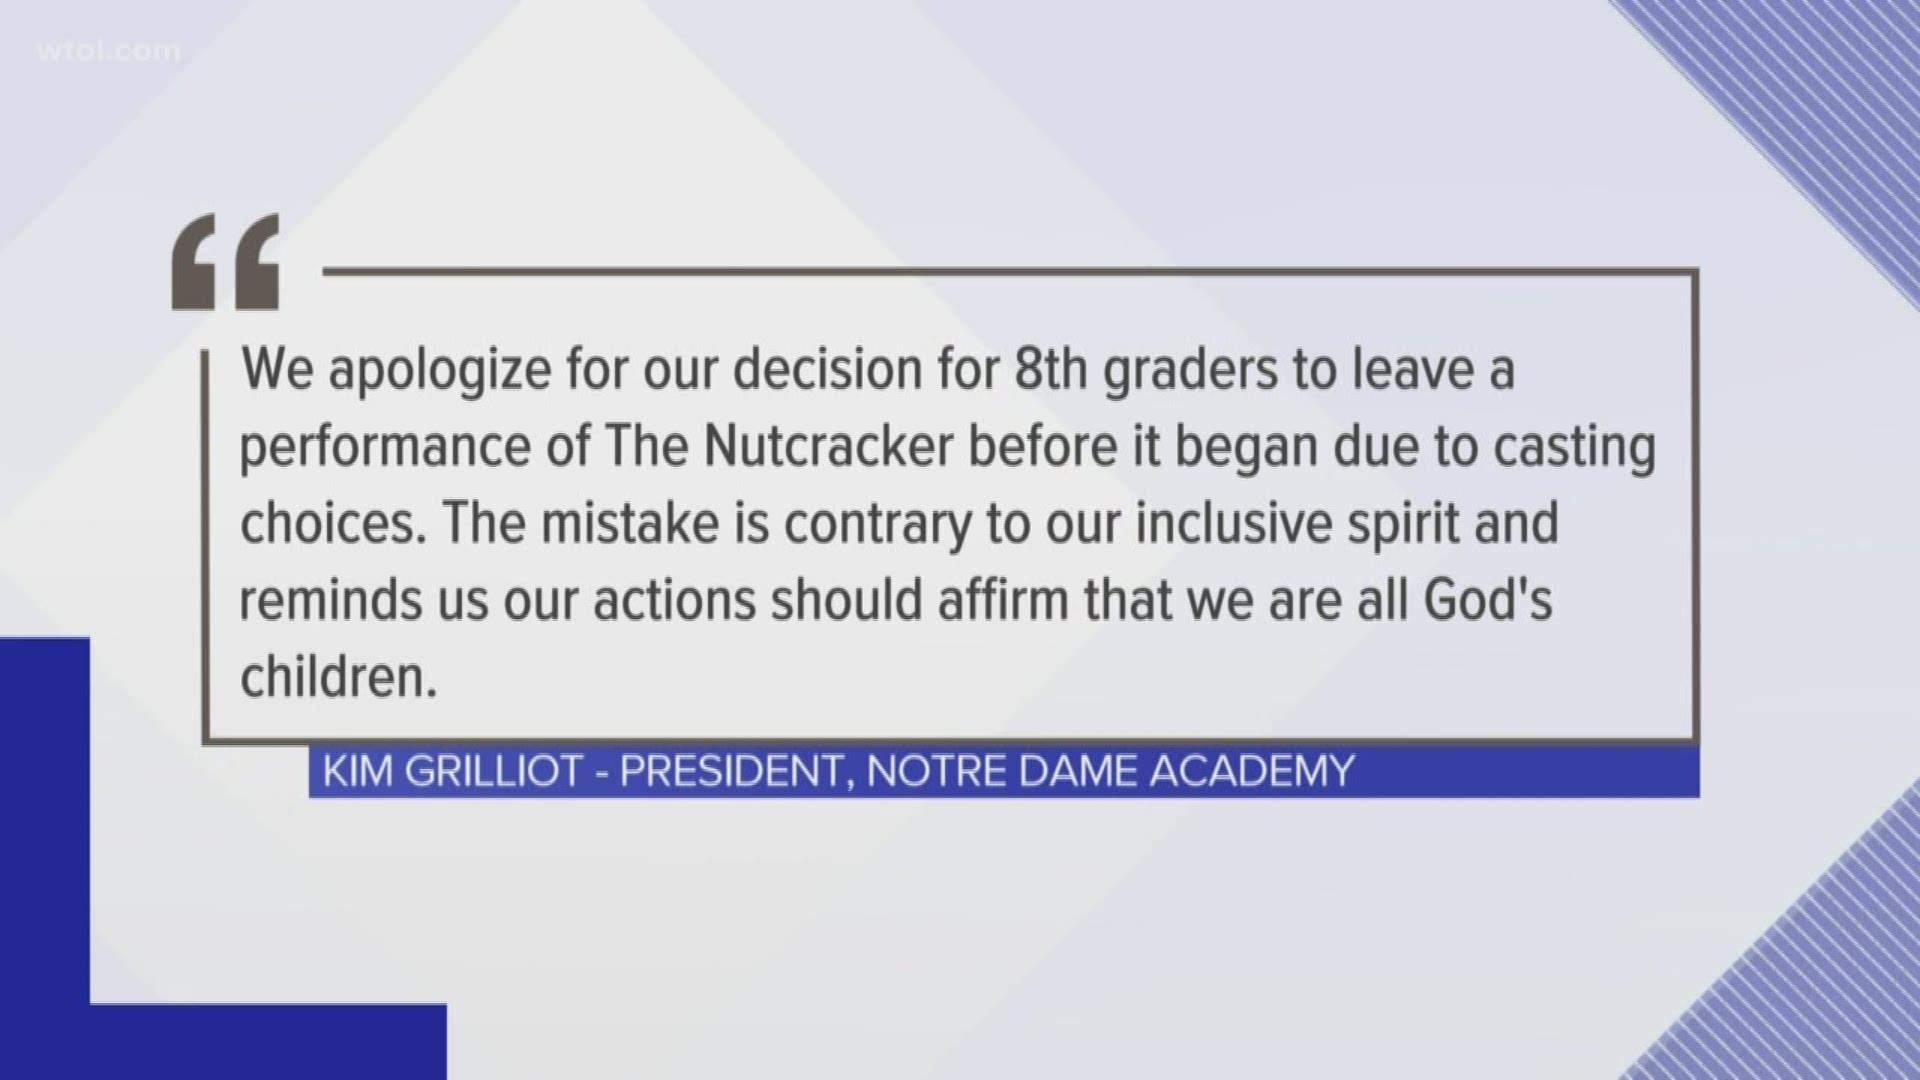 A Notre Dame alumna spoke out against the school chaperones' decision to make the students leave the play after learning two cast members were playing a gay couple.